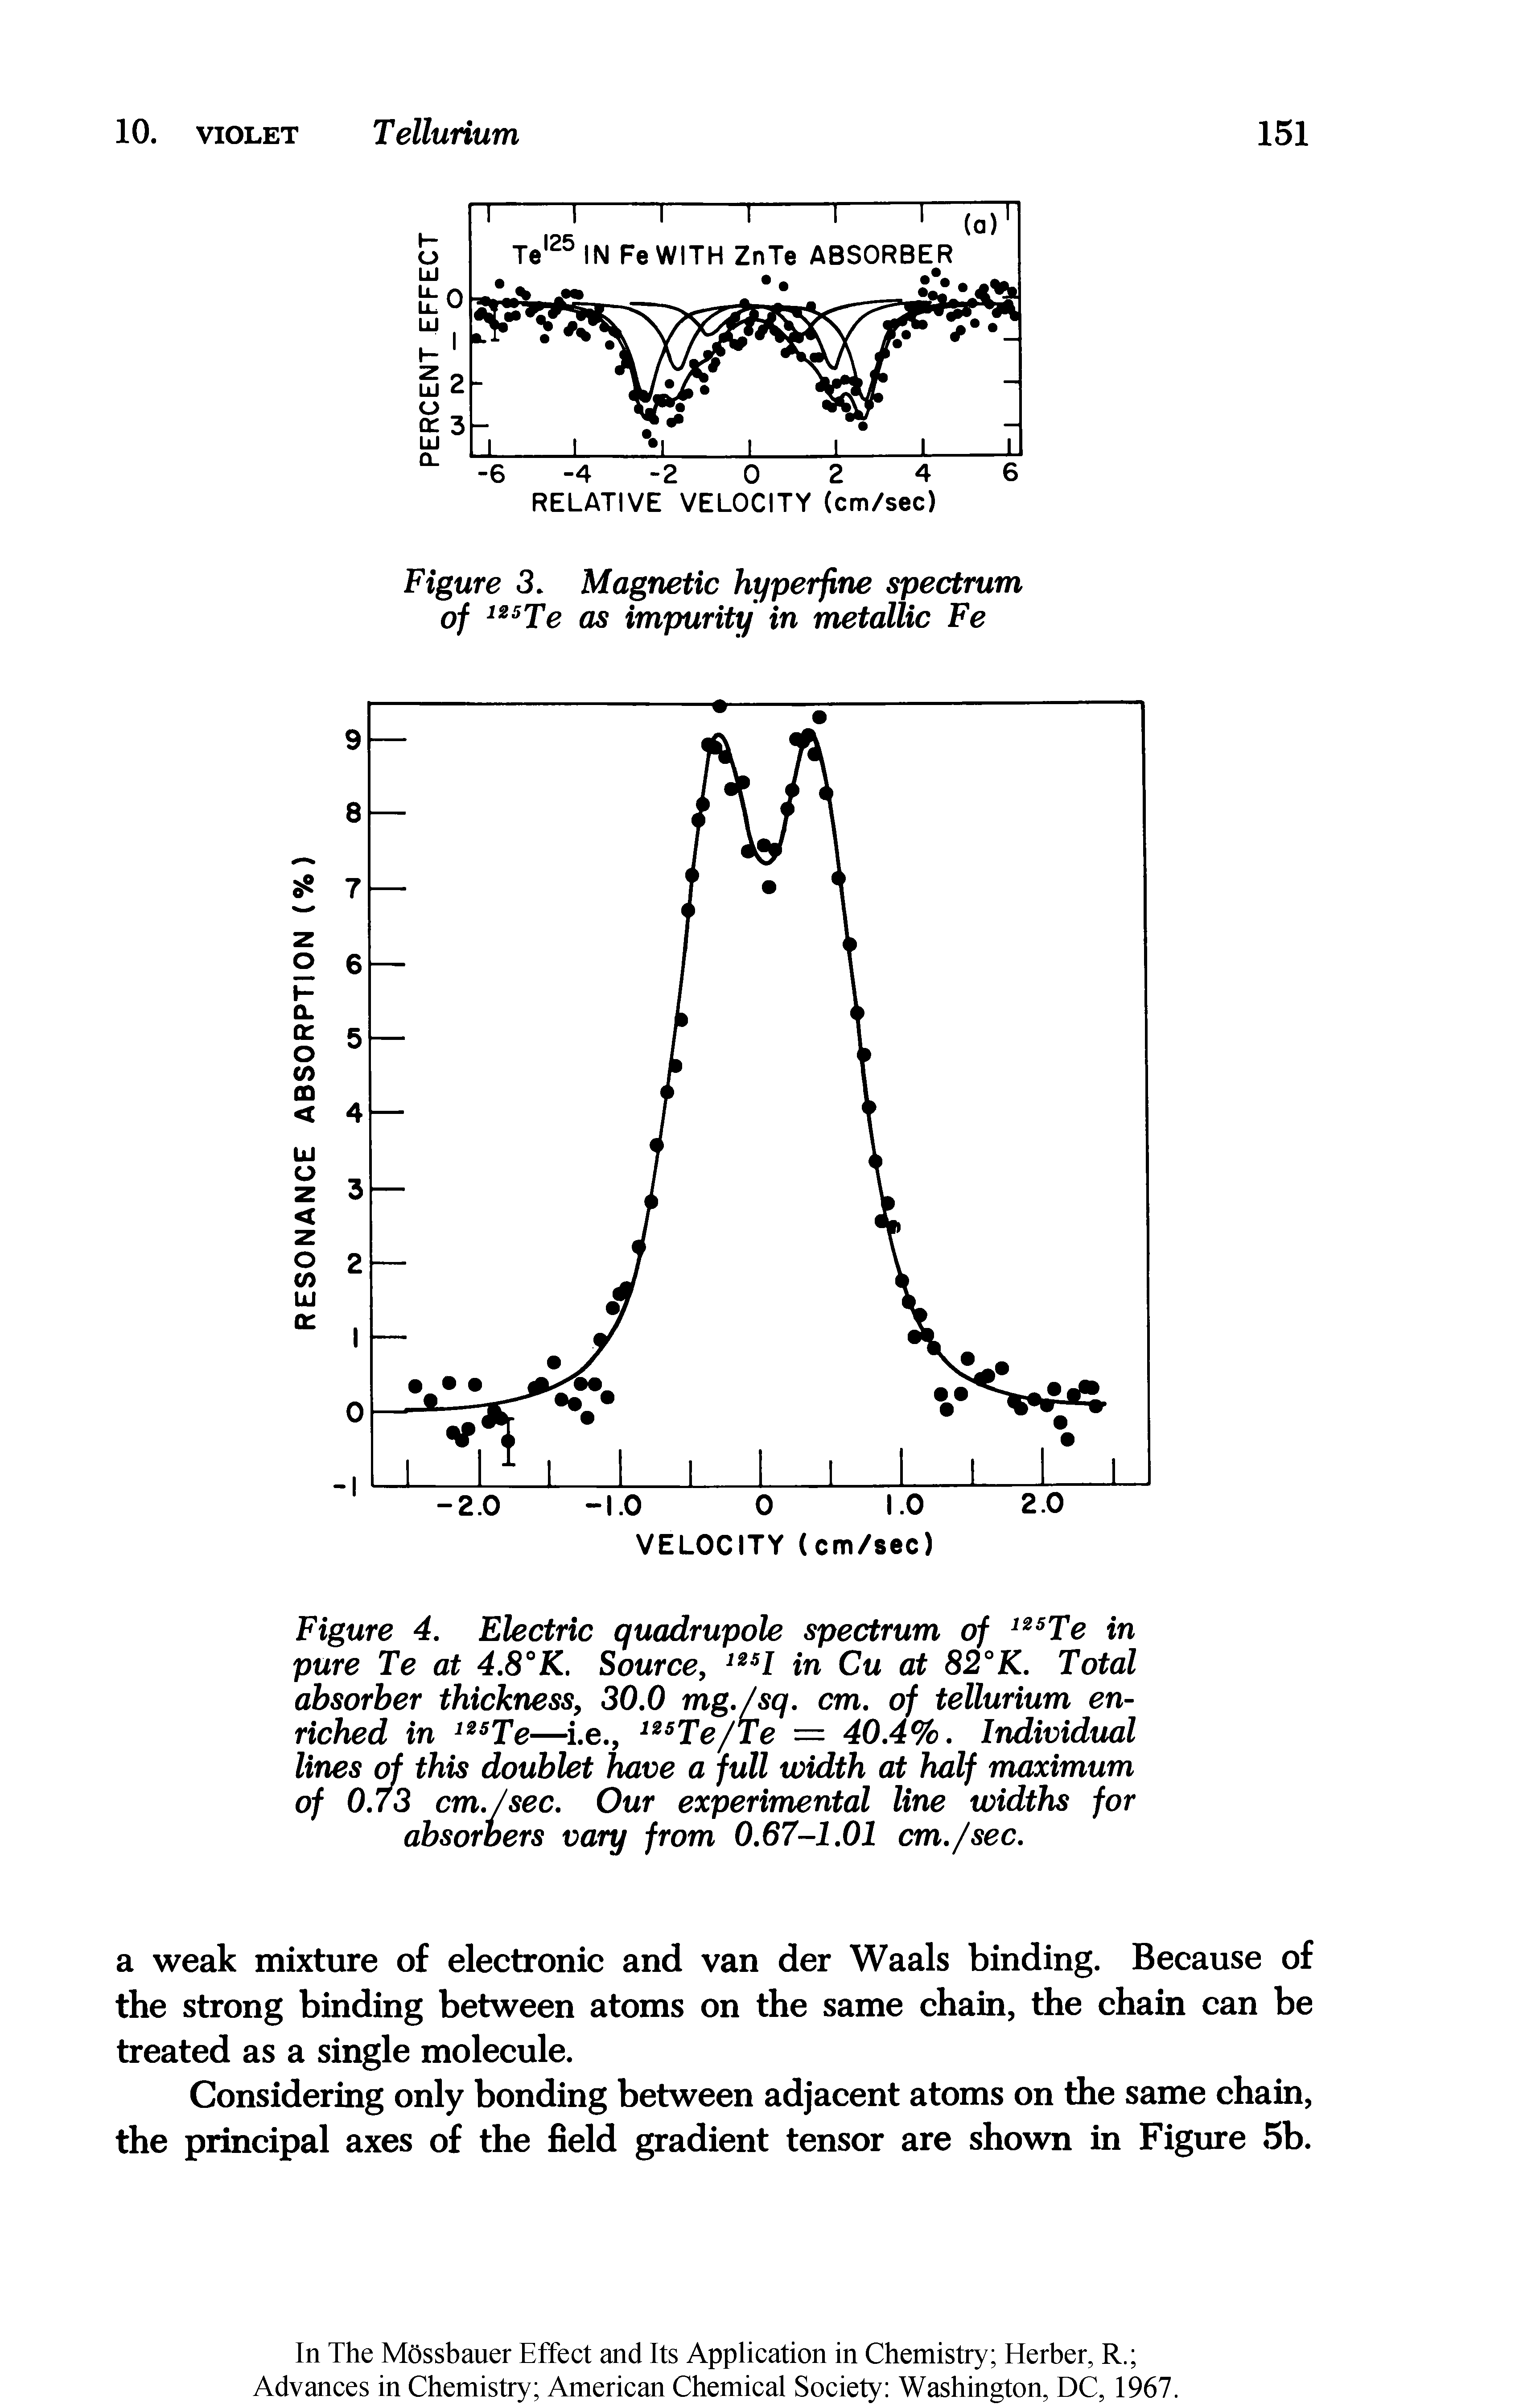 Figure 4. Electric quadrupole spectrum of Te in pure Te at 4.8°K. Source, in Cu at 82°K. Total absorber thickness, 30.0 mg./sq. cm. of tellurium enriched in Te—i.e., Te/Te = 40.4%. Individual lines (A this doublet have a full width at half maximum of 0./3 cm./sec. Our experimental line widths for absorbers vary from 0.67-101 cm./sec.